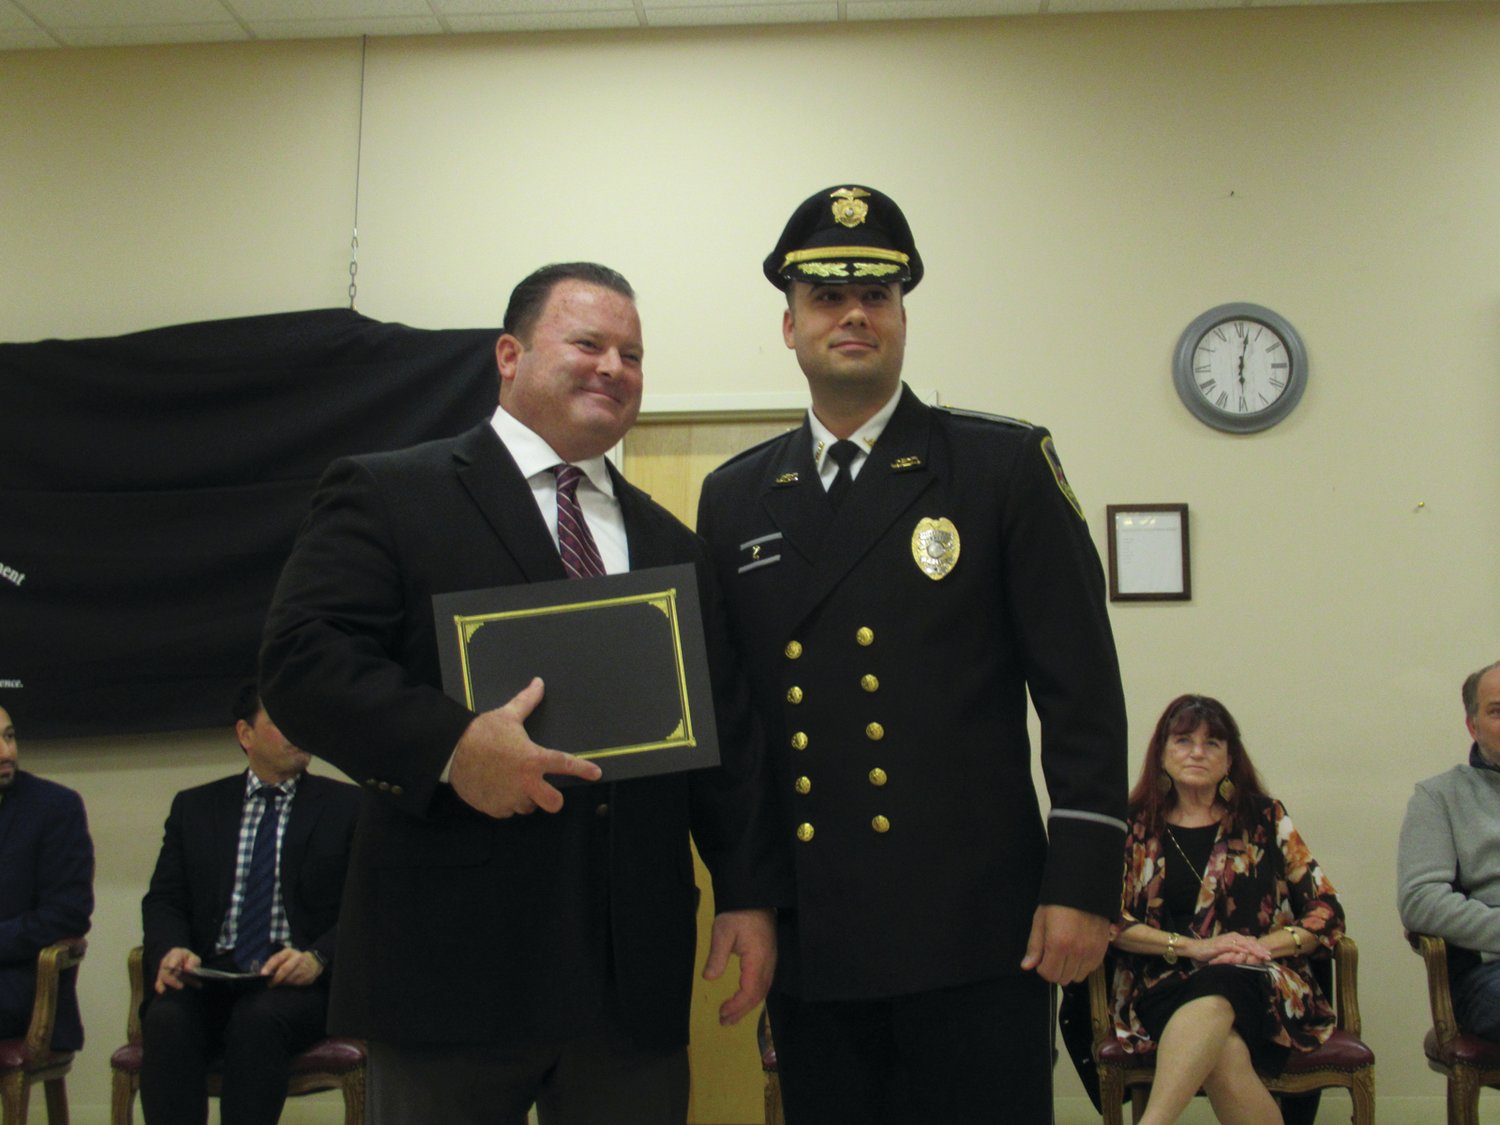 LETTER LINK: JPD Deputy Chief Mark Vieira presents Detective Tom Dwyer with a Letter of Recognition Award during the impressive and recent police awards ceremony.